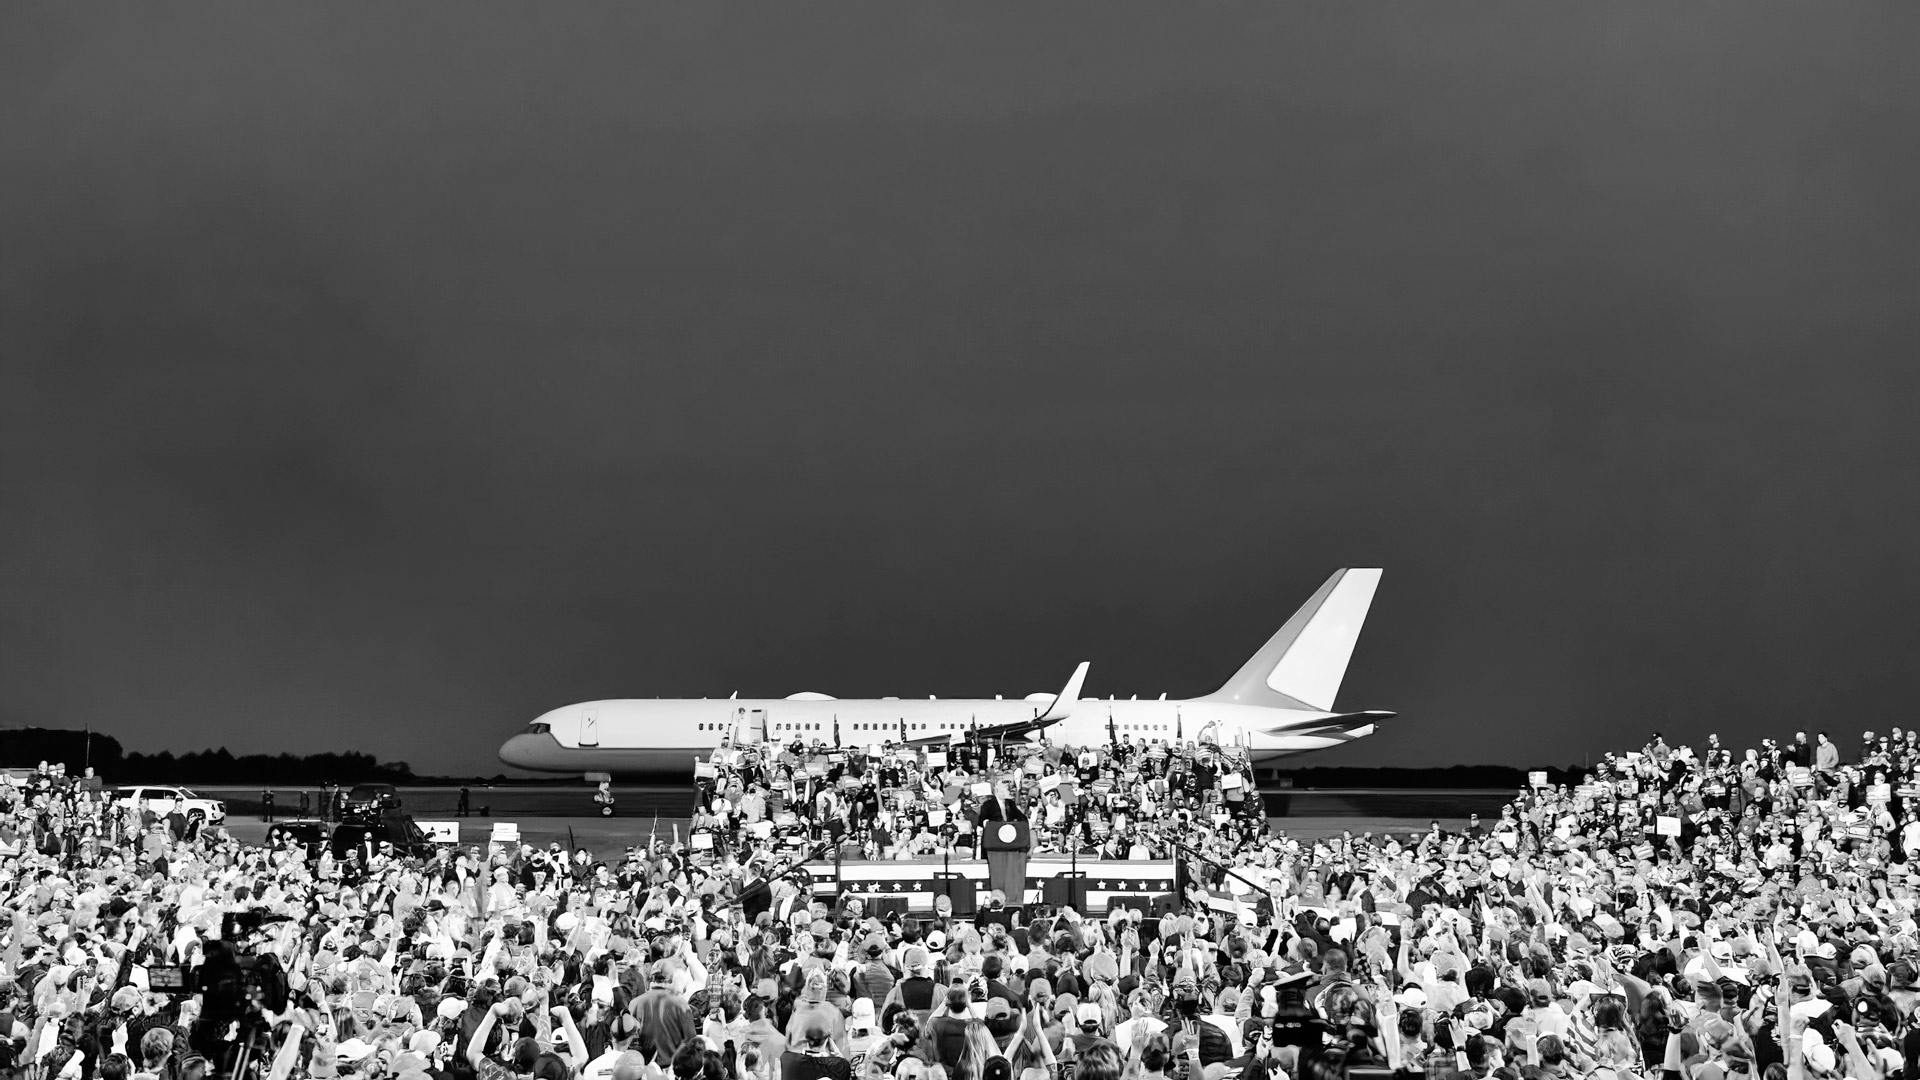 People attending a political meeting in front of a plane